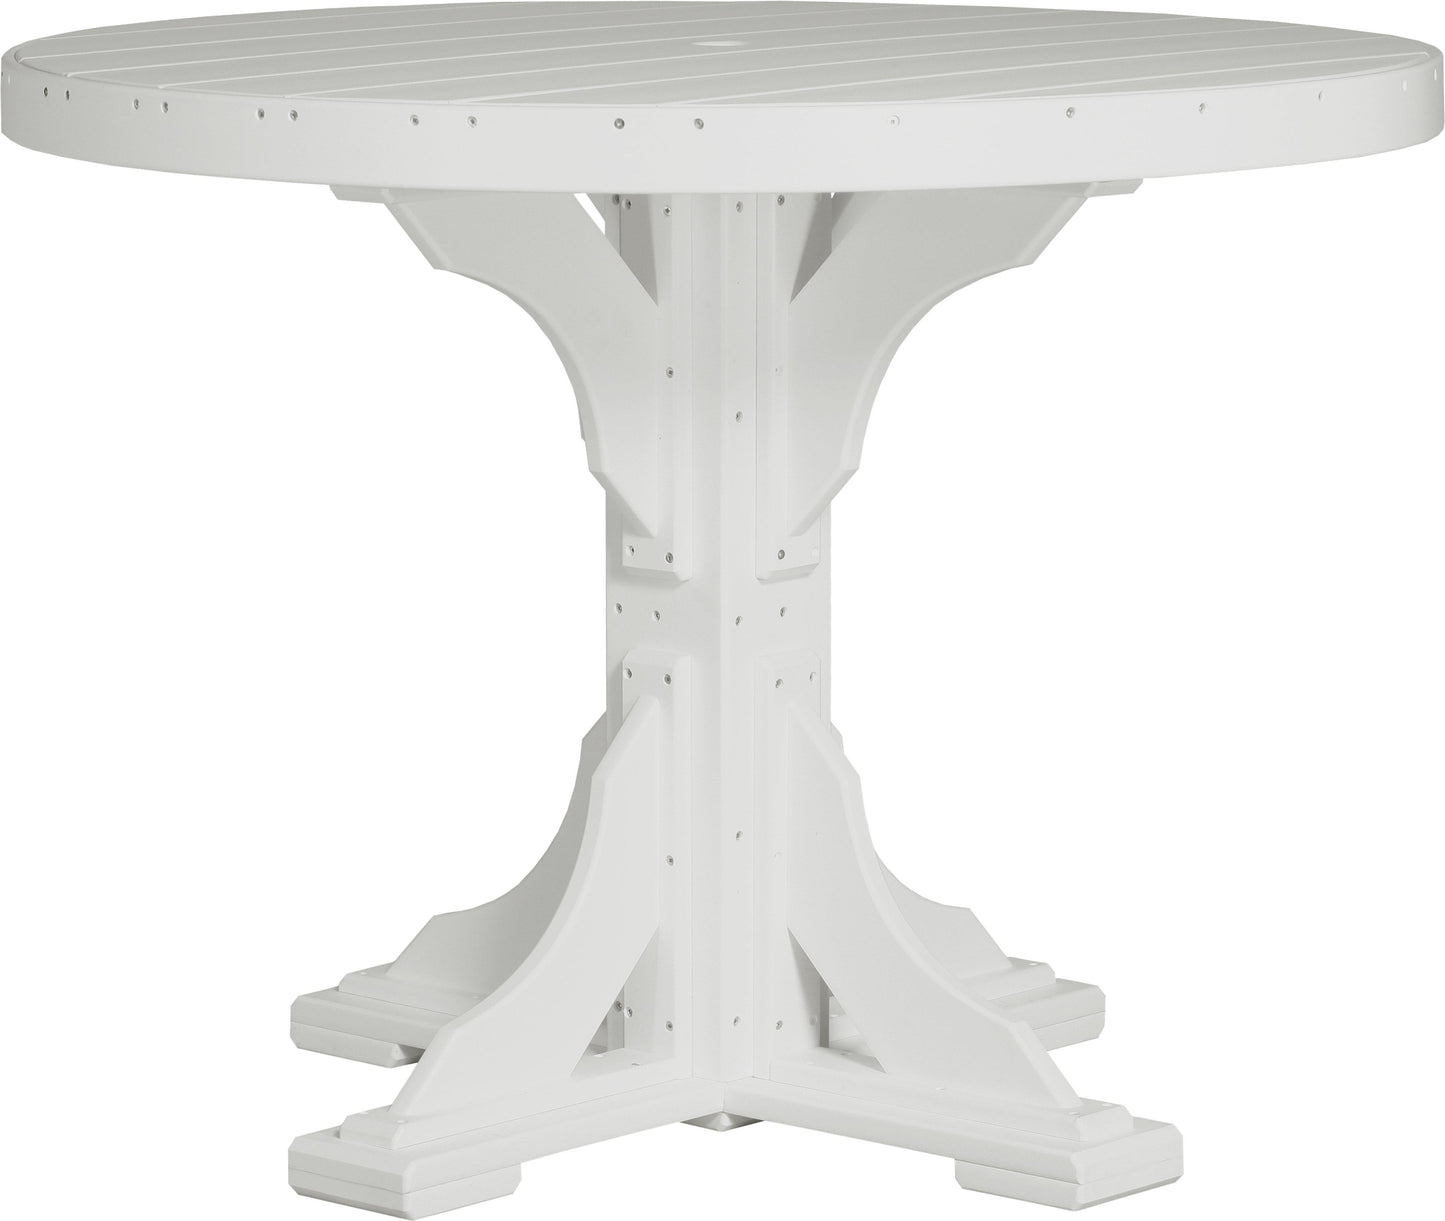 LuxCraft Recycled Plastic 4' Counter Height Round Table - LEAD TIME TO SHIP 3 TO 4 WEEKS